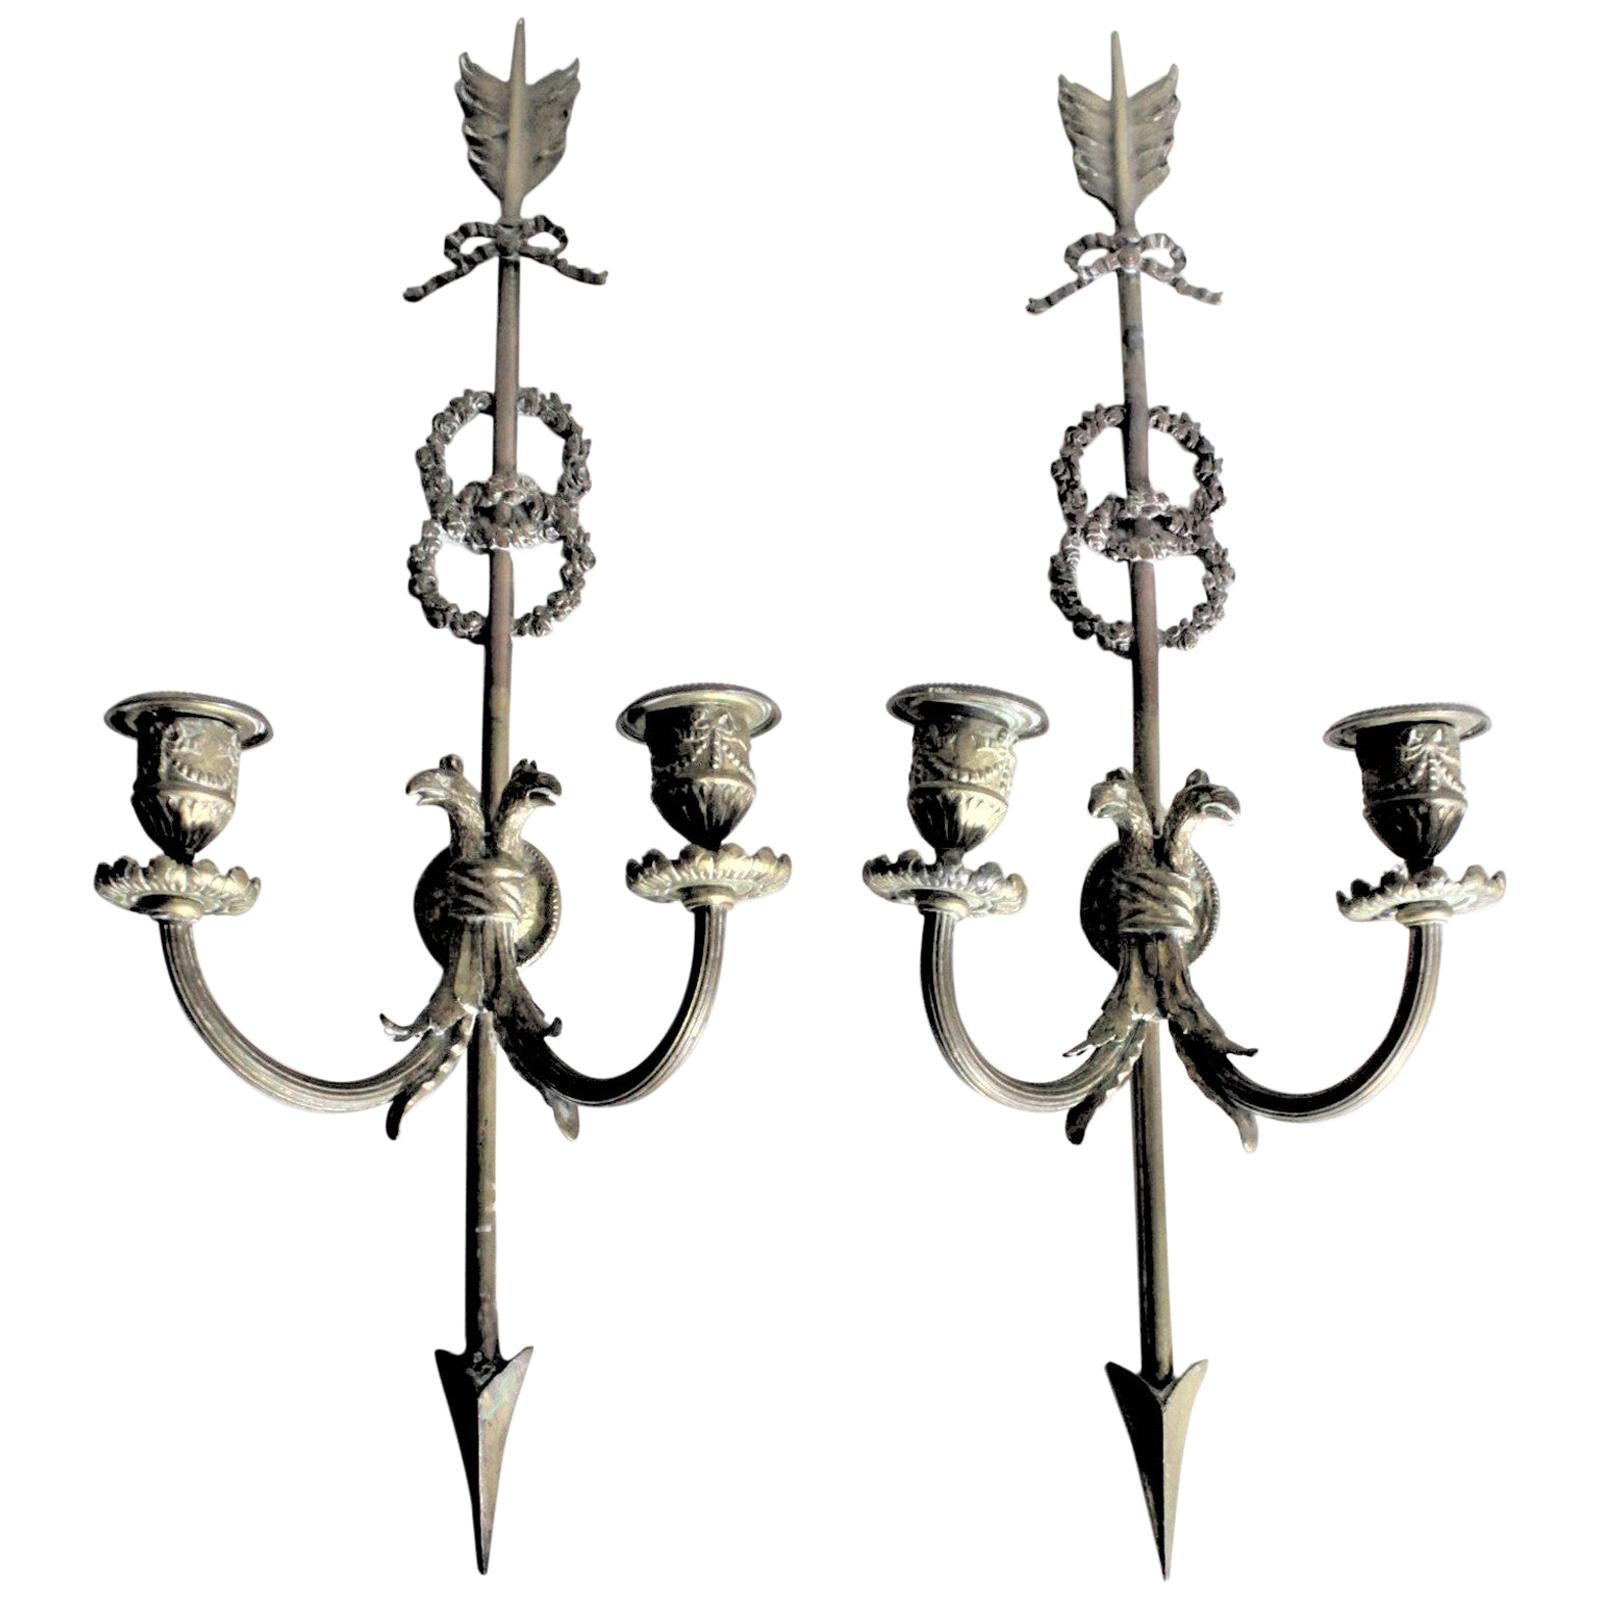 Pair of Ornate Antique Cast Bronze Wall Sconces / Candle Holders with Bird Motif